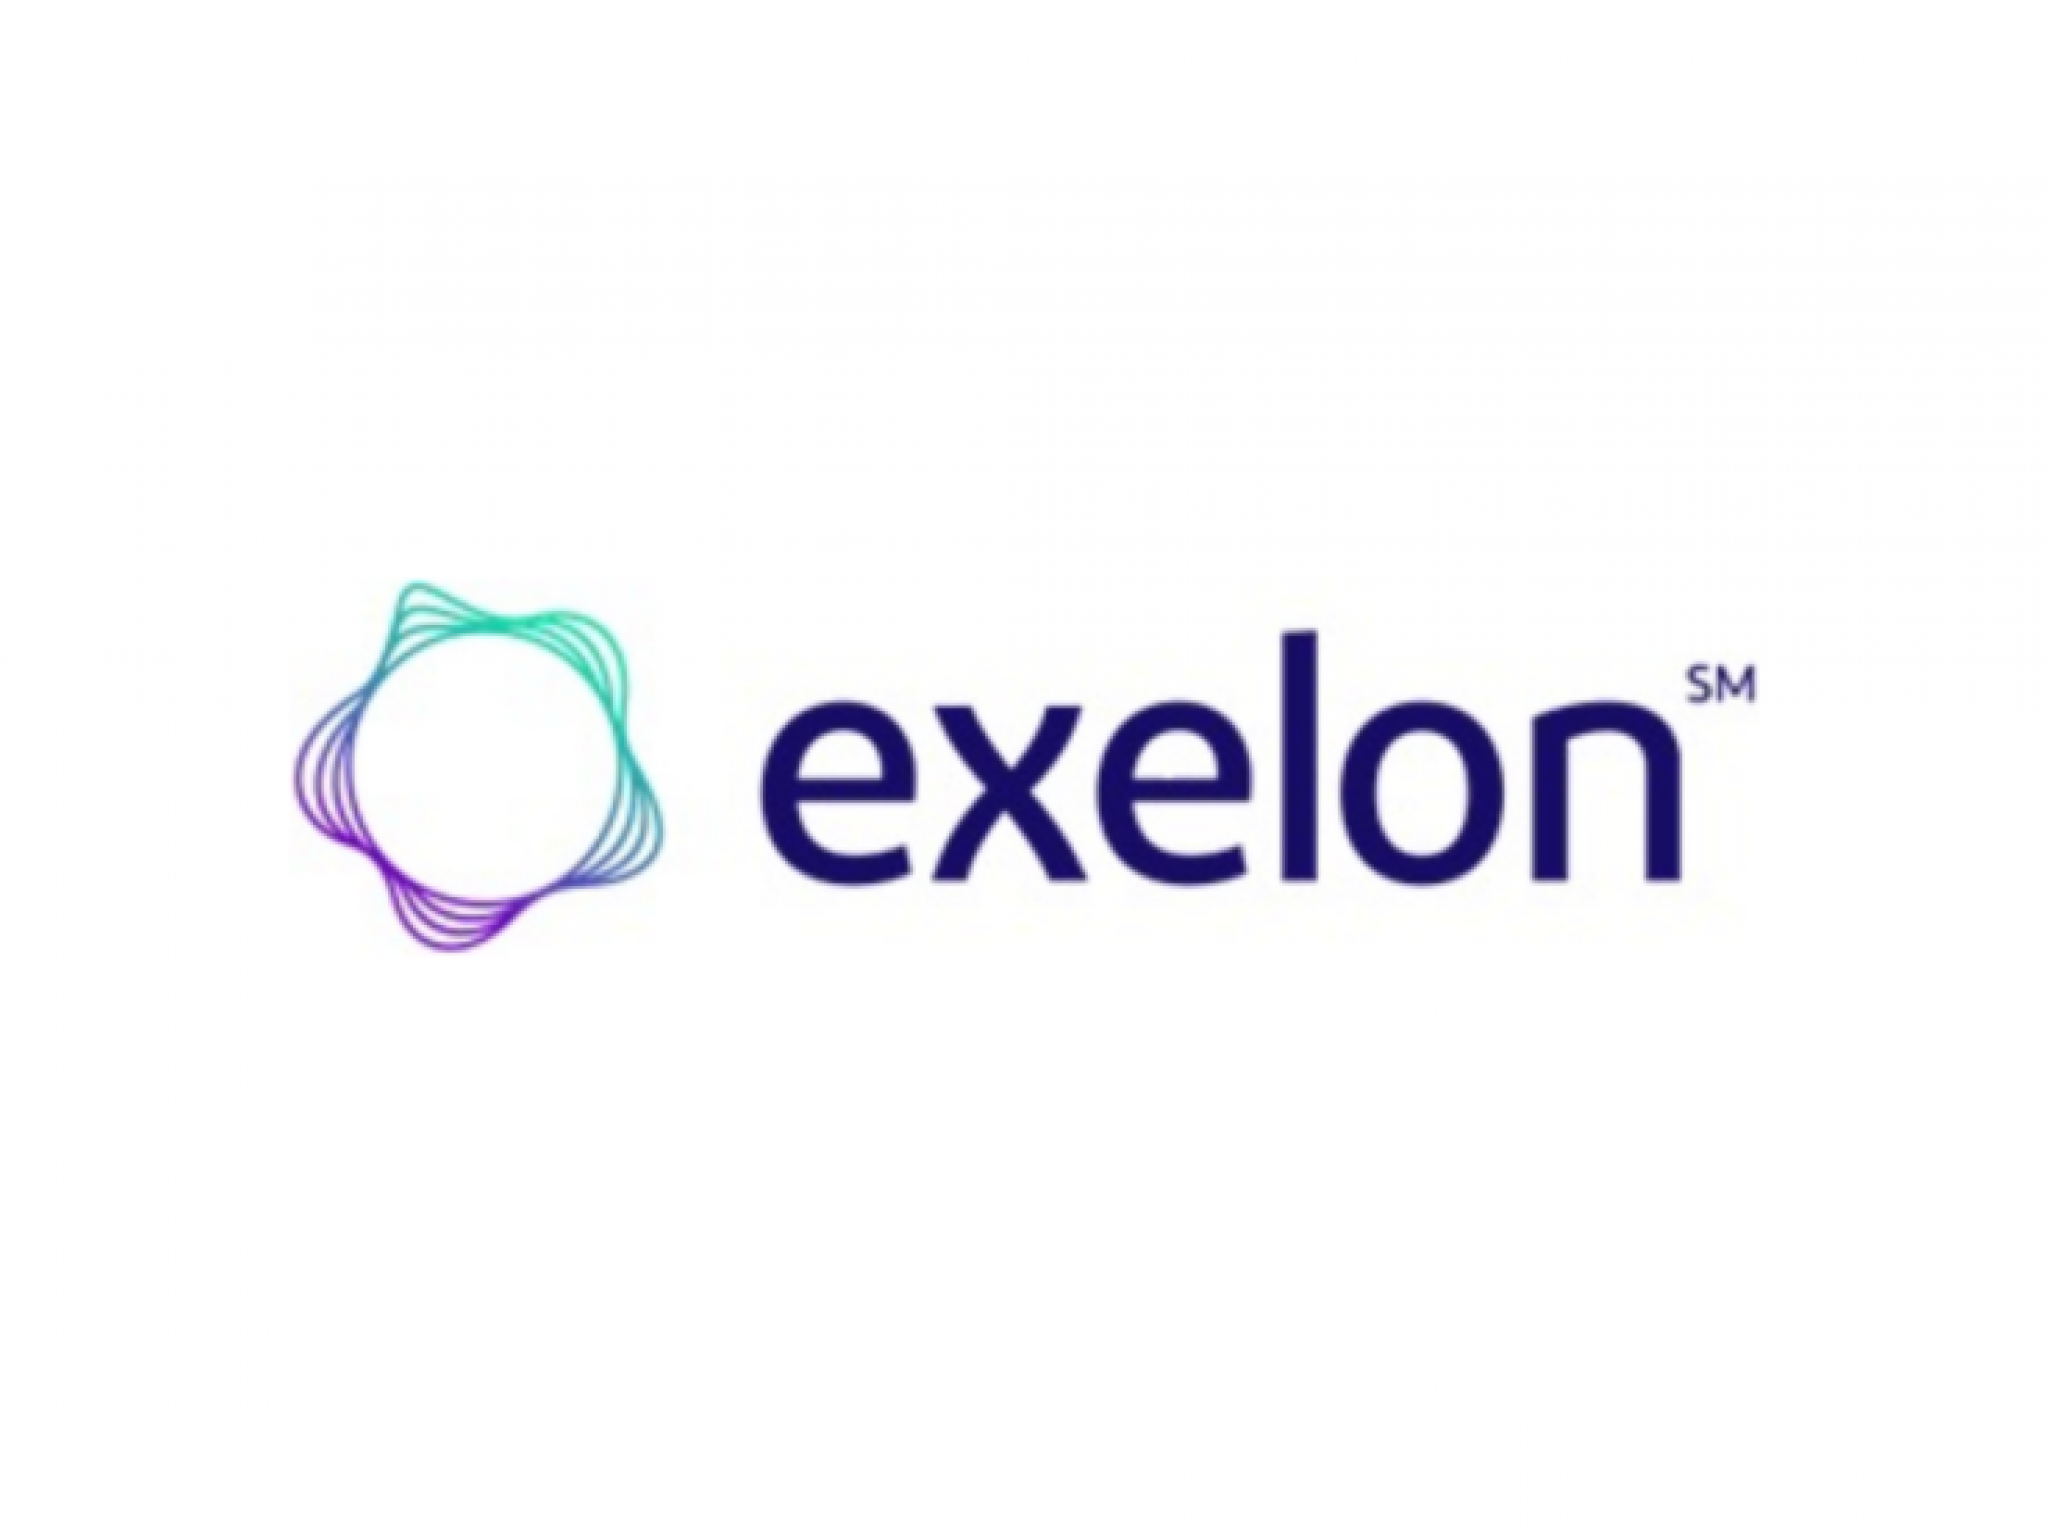  exelon-q4-highlights-earnings-exceed-projections-dividend-hike--more 